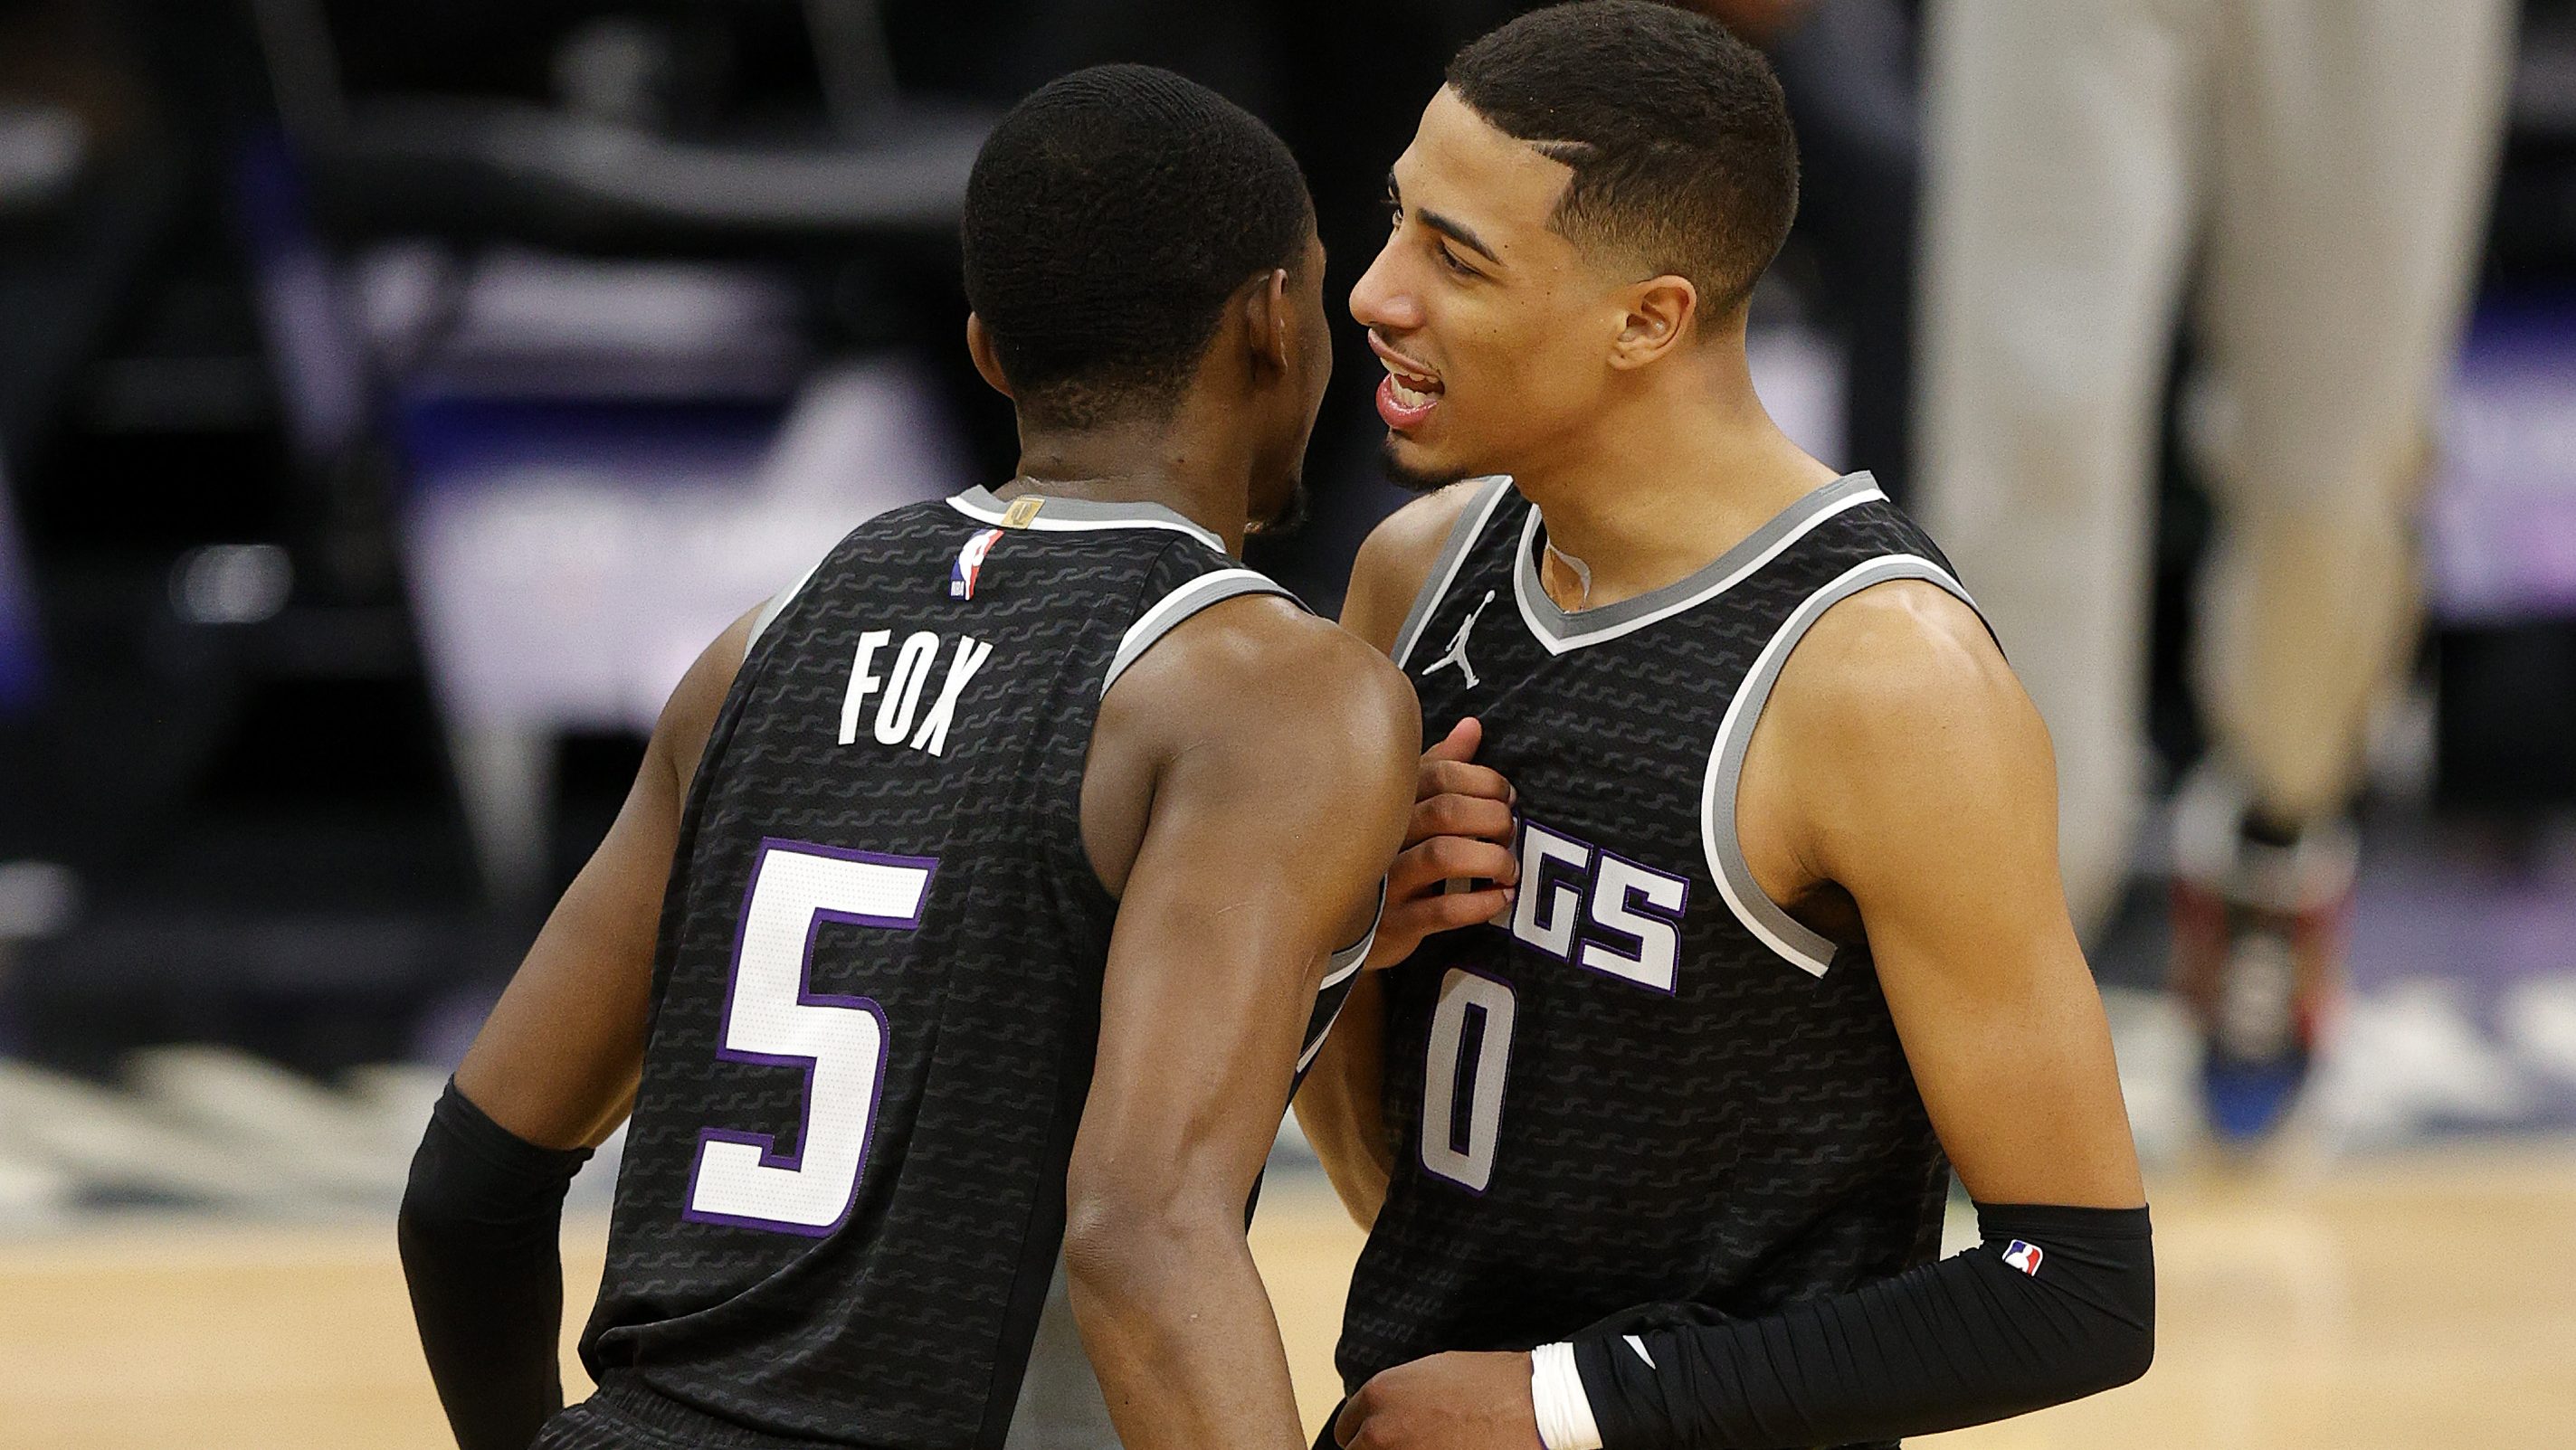 Rookie Tyrese Haliburton has been a bright spot for the Kings so far